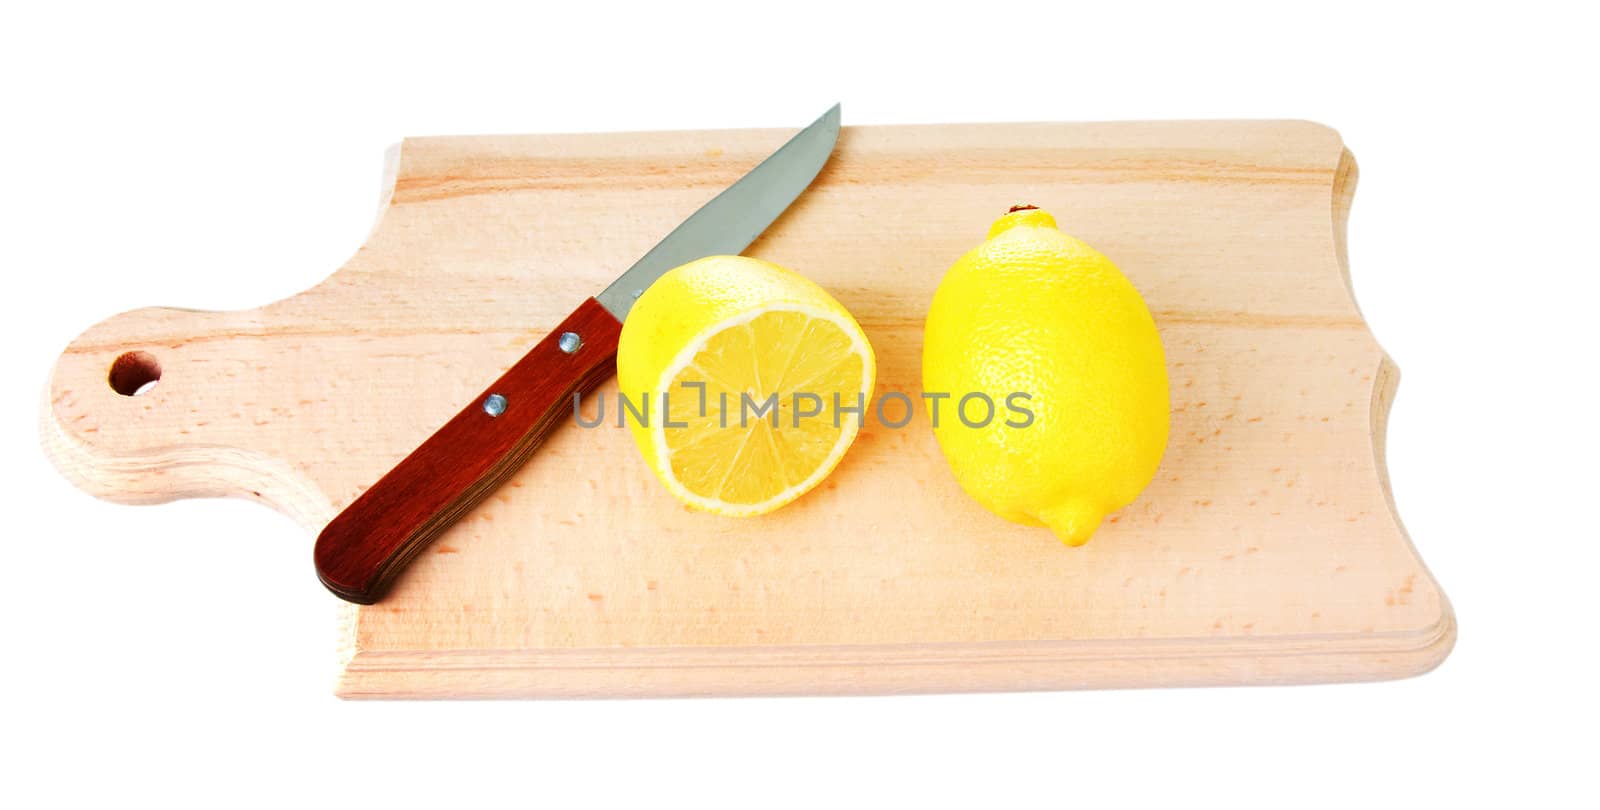 One whole lemon and one cutted lemon with knife on wooden plank. Isolated on white background.